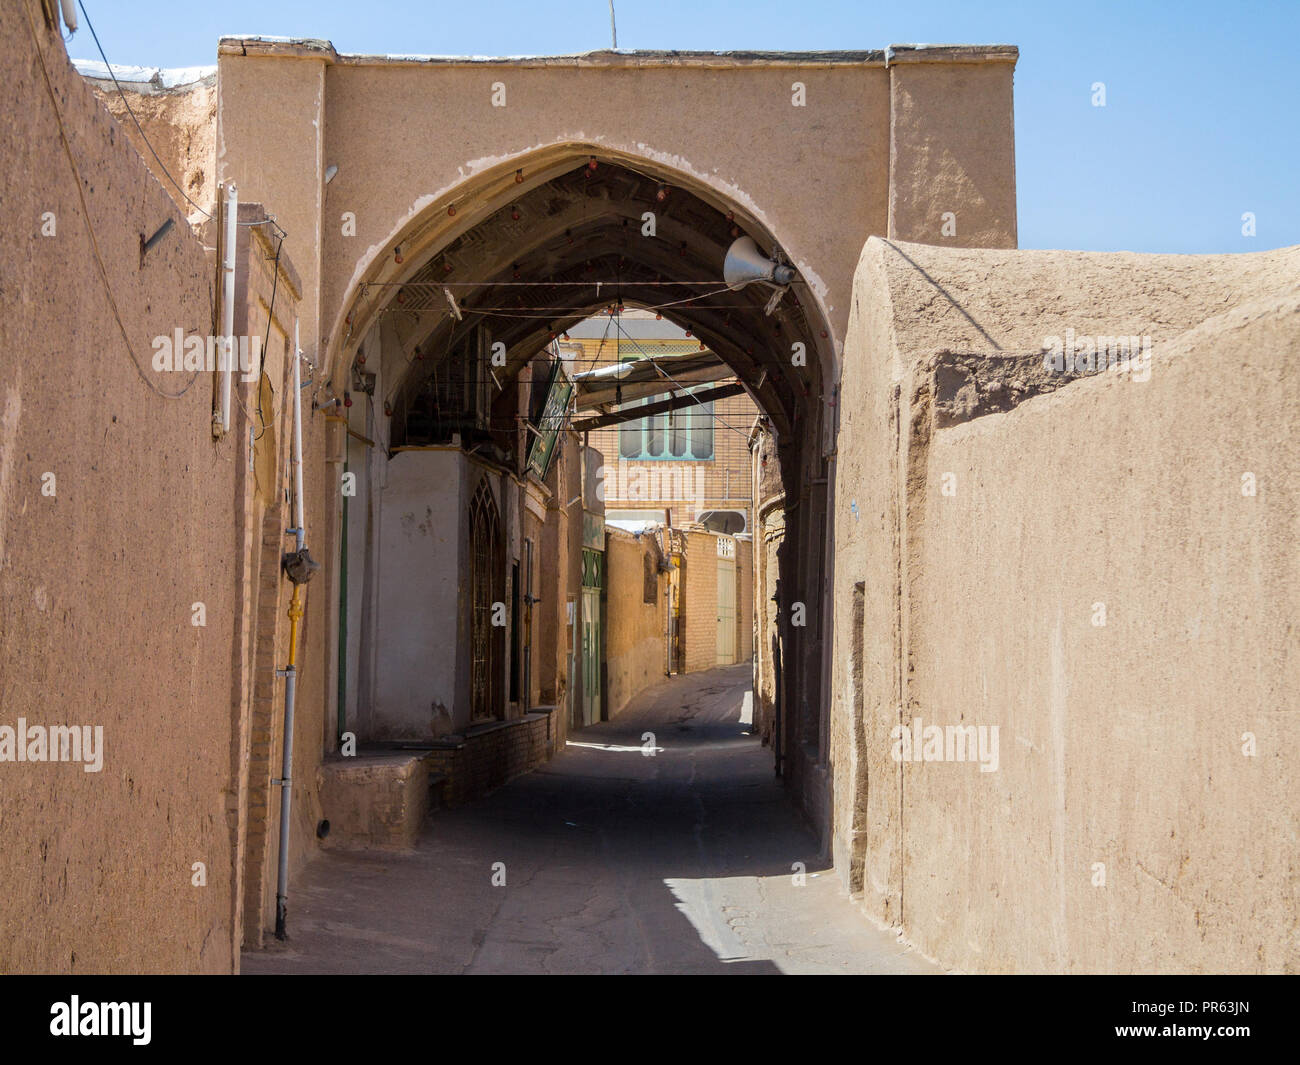 Typical street of the old town of Kashan, iran, with its typical clay walls, ancient gates and clay buildings. Kashan is the main city of Central iran Stock Photo